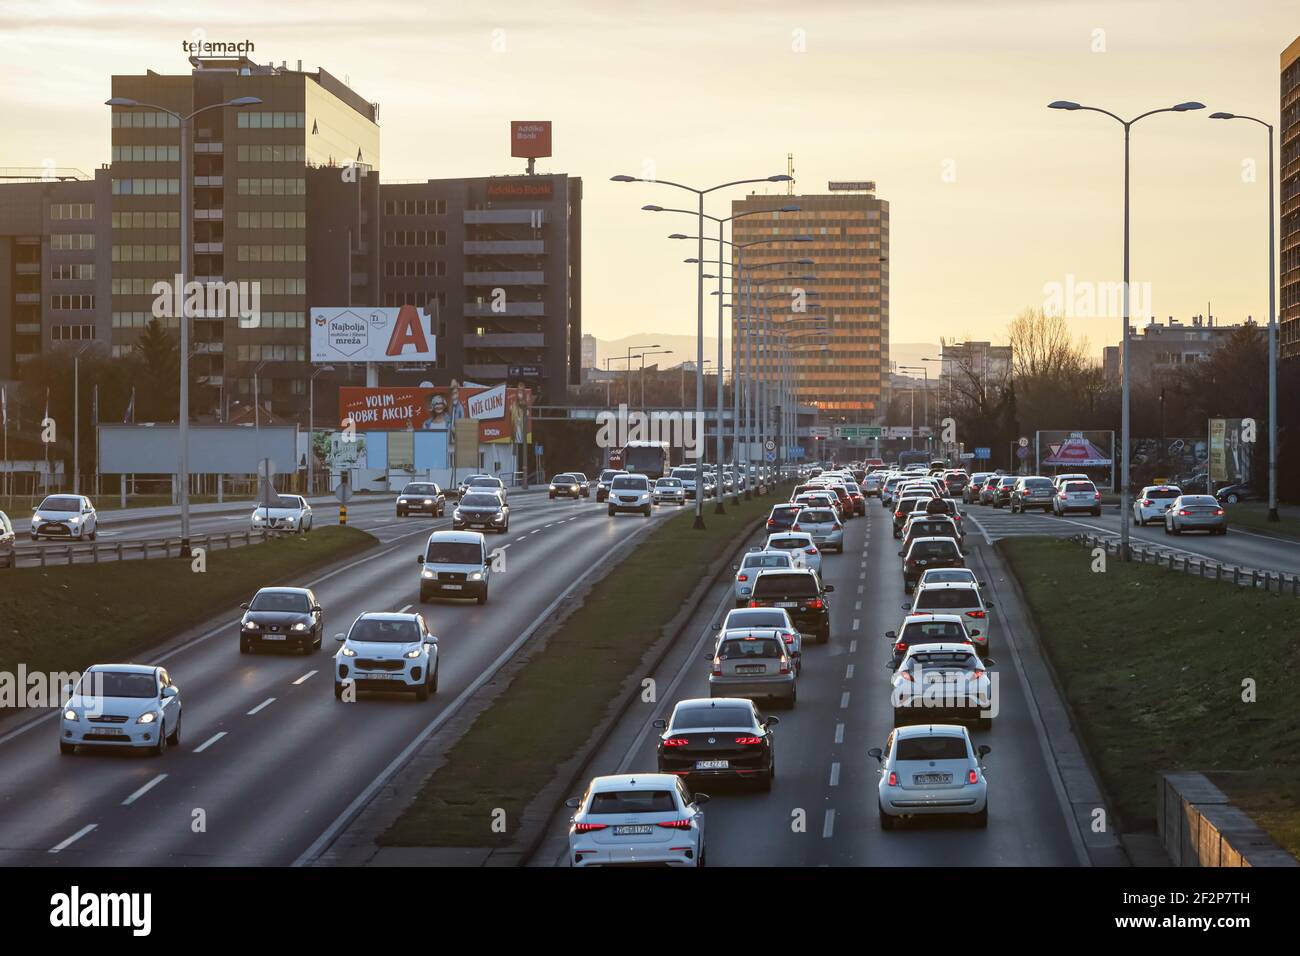 Rush hour on Slavonska Avenue in a westerly direction. Slavonska Avenue connects with Zagrebačka Avenue and it is the main Avenue that connects the Ea Stock Photo